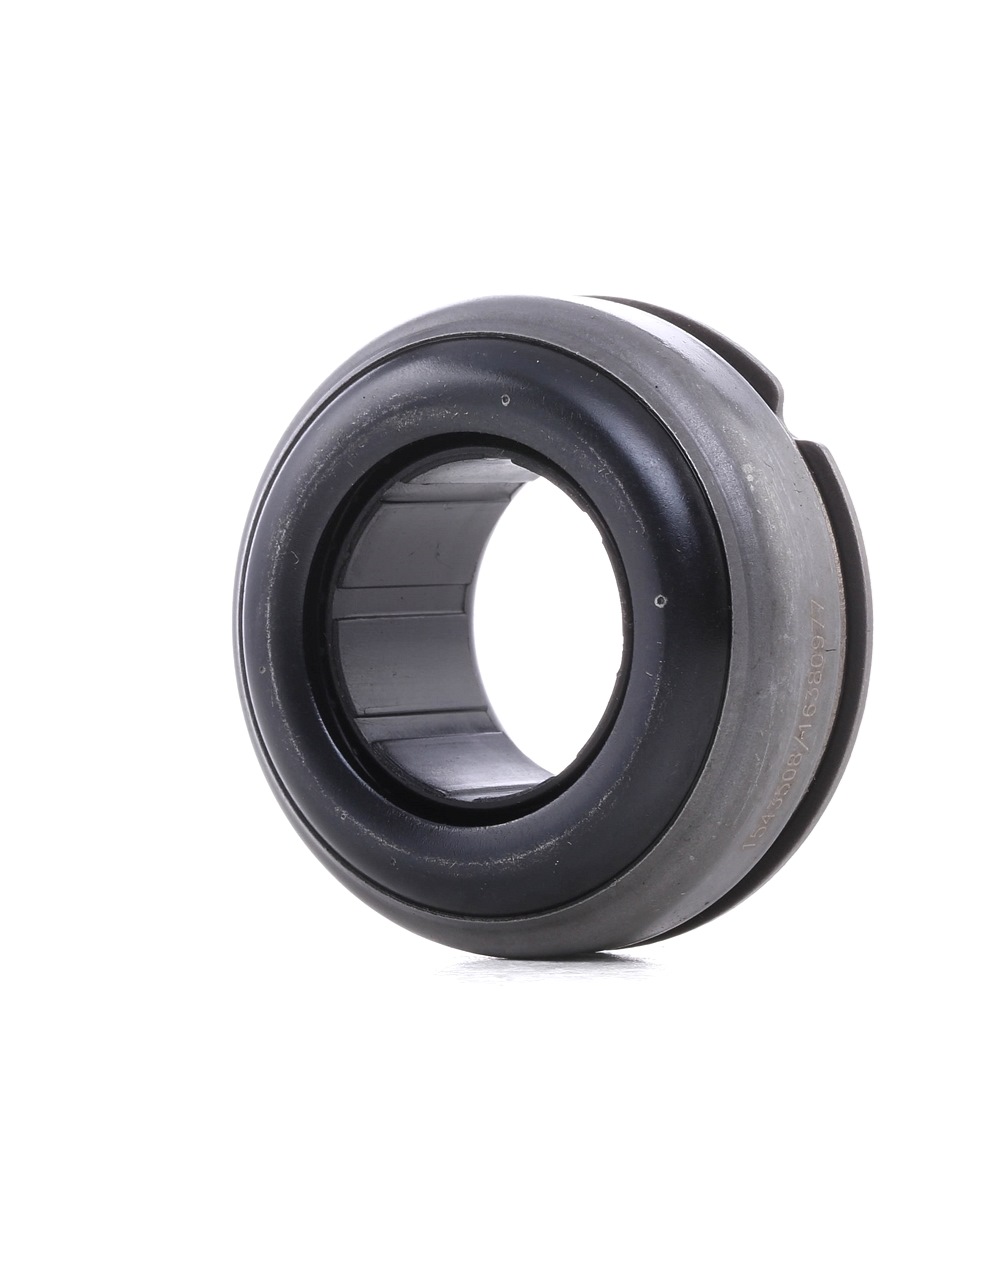 Image of RIDEX Clutch Release Bearing FIAT,PEUGEOT,TOYOTA 48R0065 1611266180,1611284580,204168 Clutch Bearing,Release Bearing,Releaser 204197,1611266180,204168